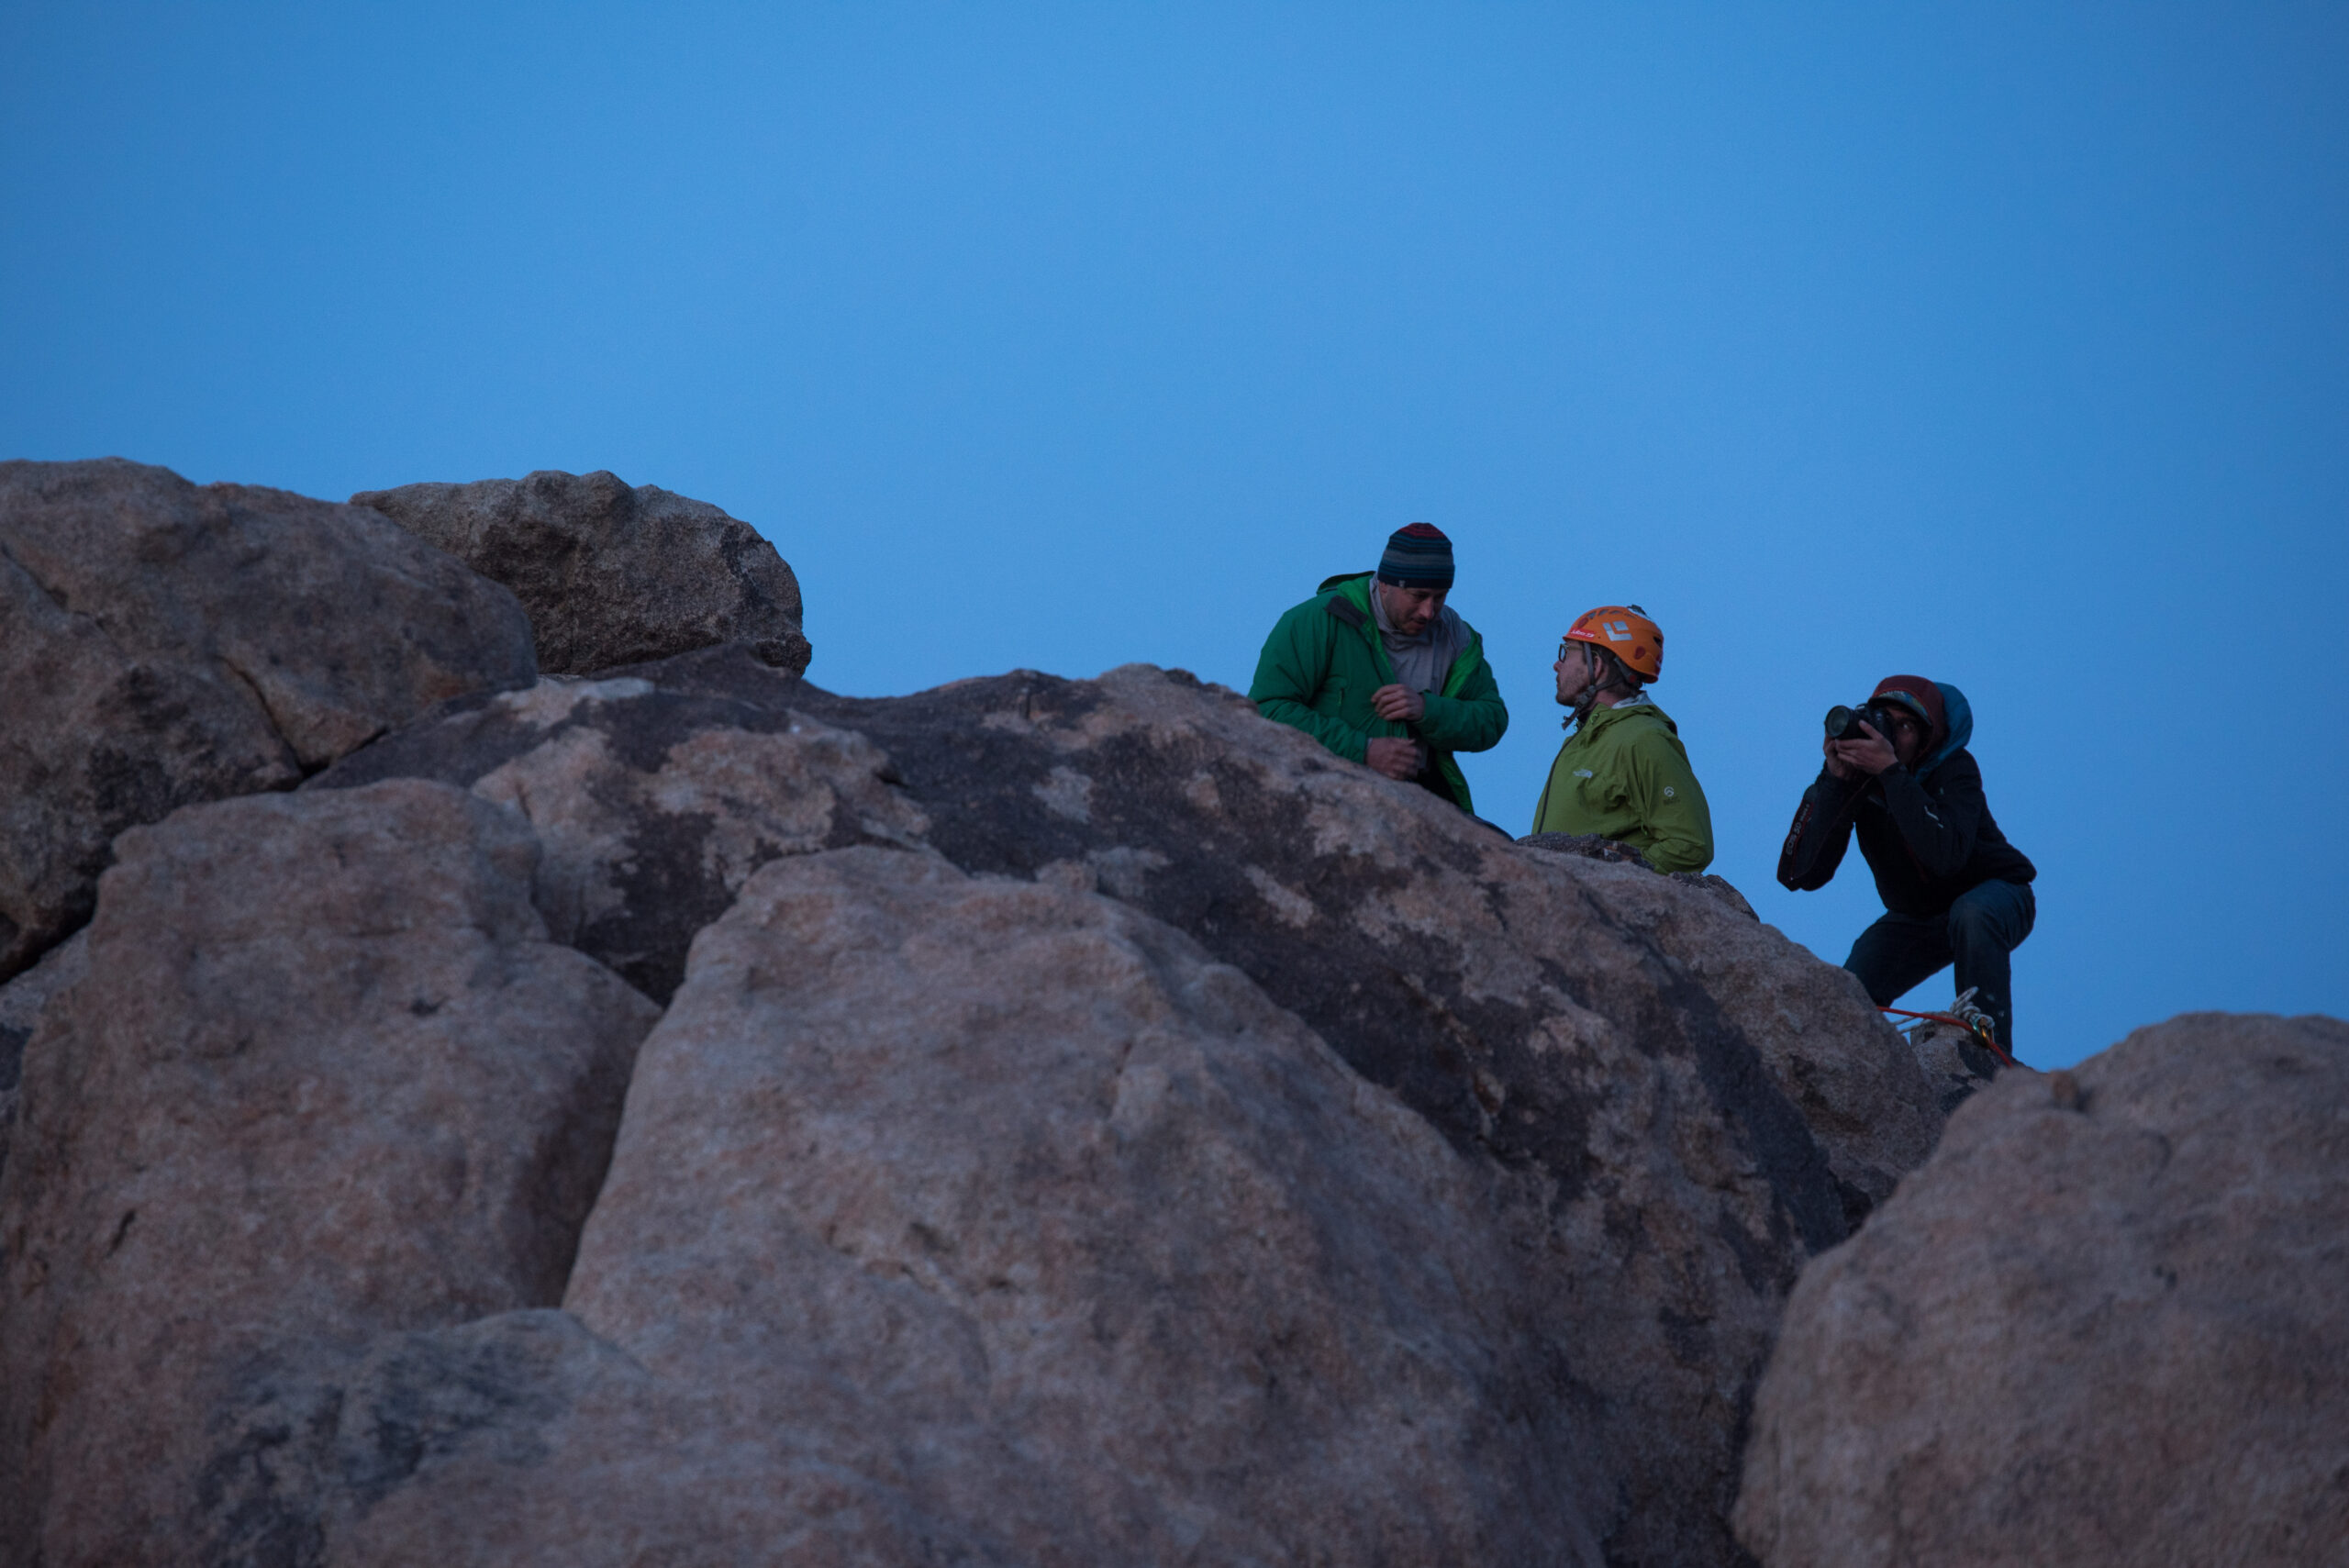 Redish colored rocks in the foreground and 3 people are on top of a route. One is taking a photo of the others.